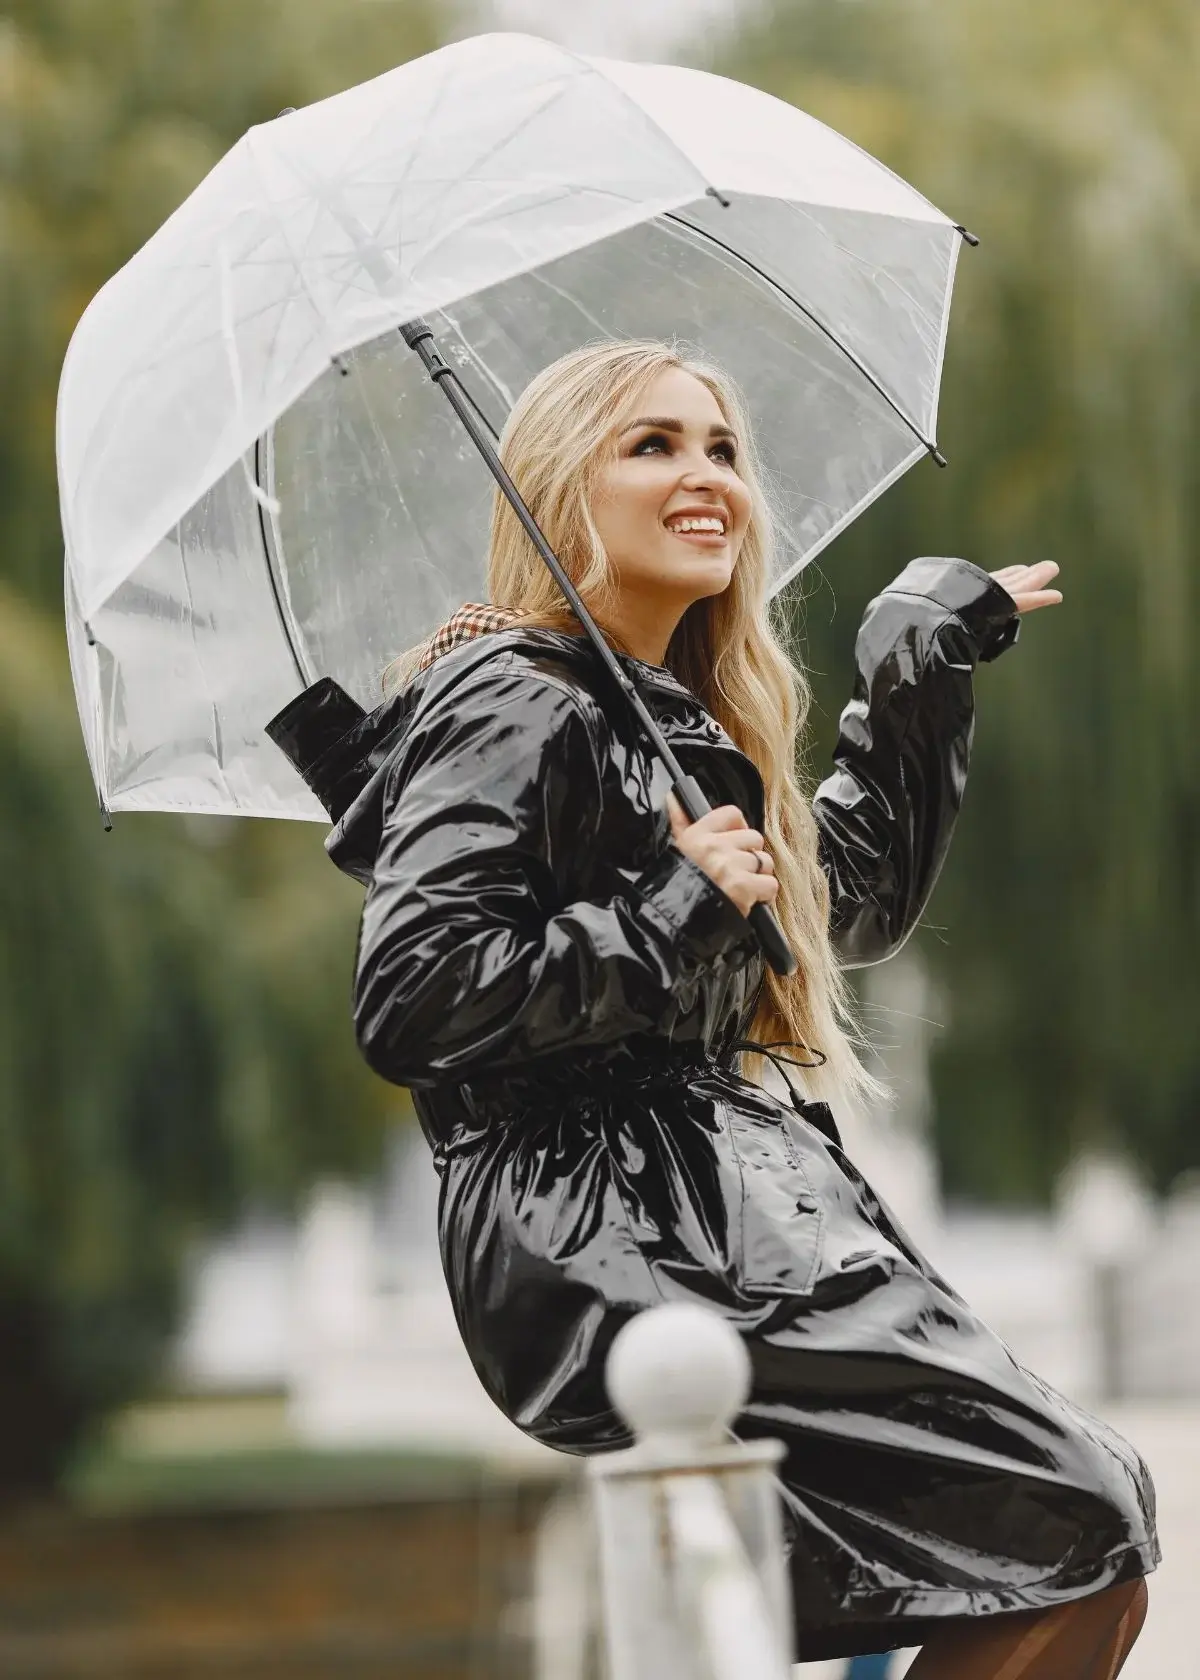 What materials are commonly used in rain ponchos?